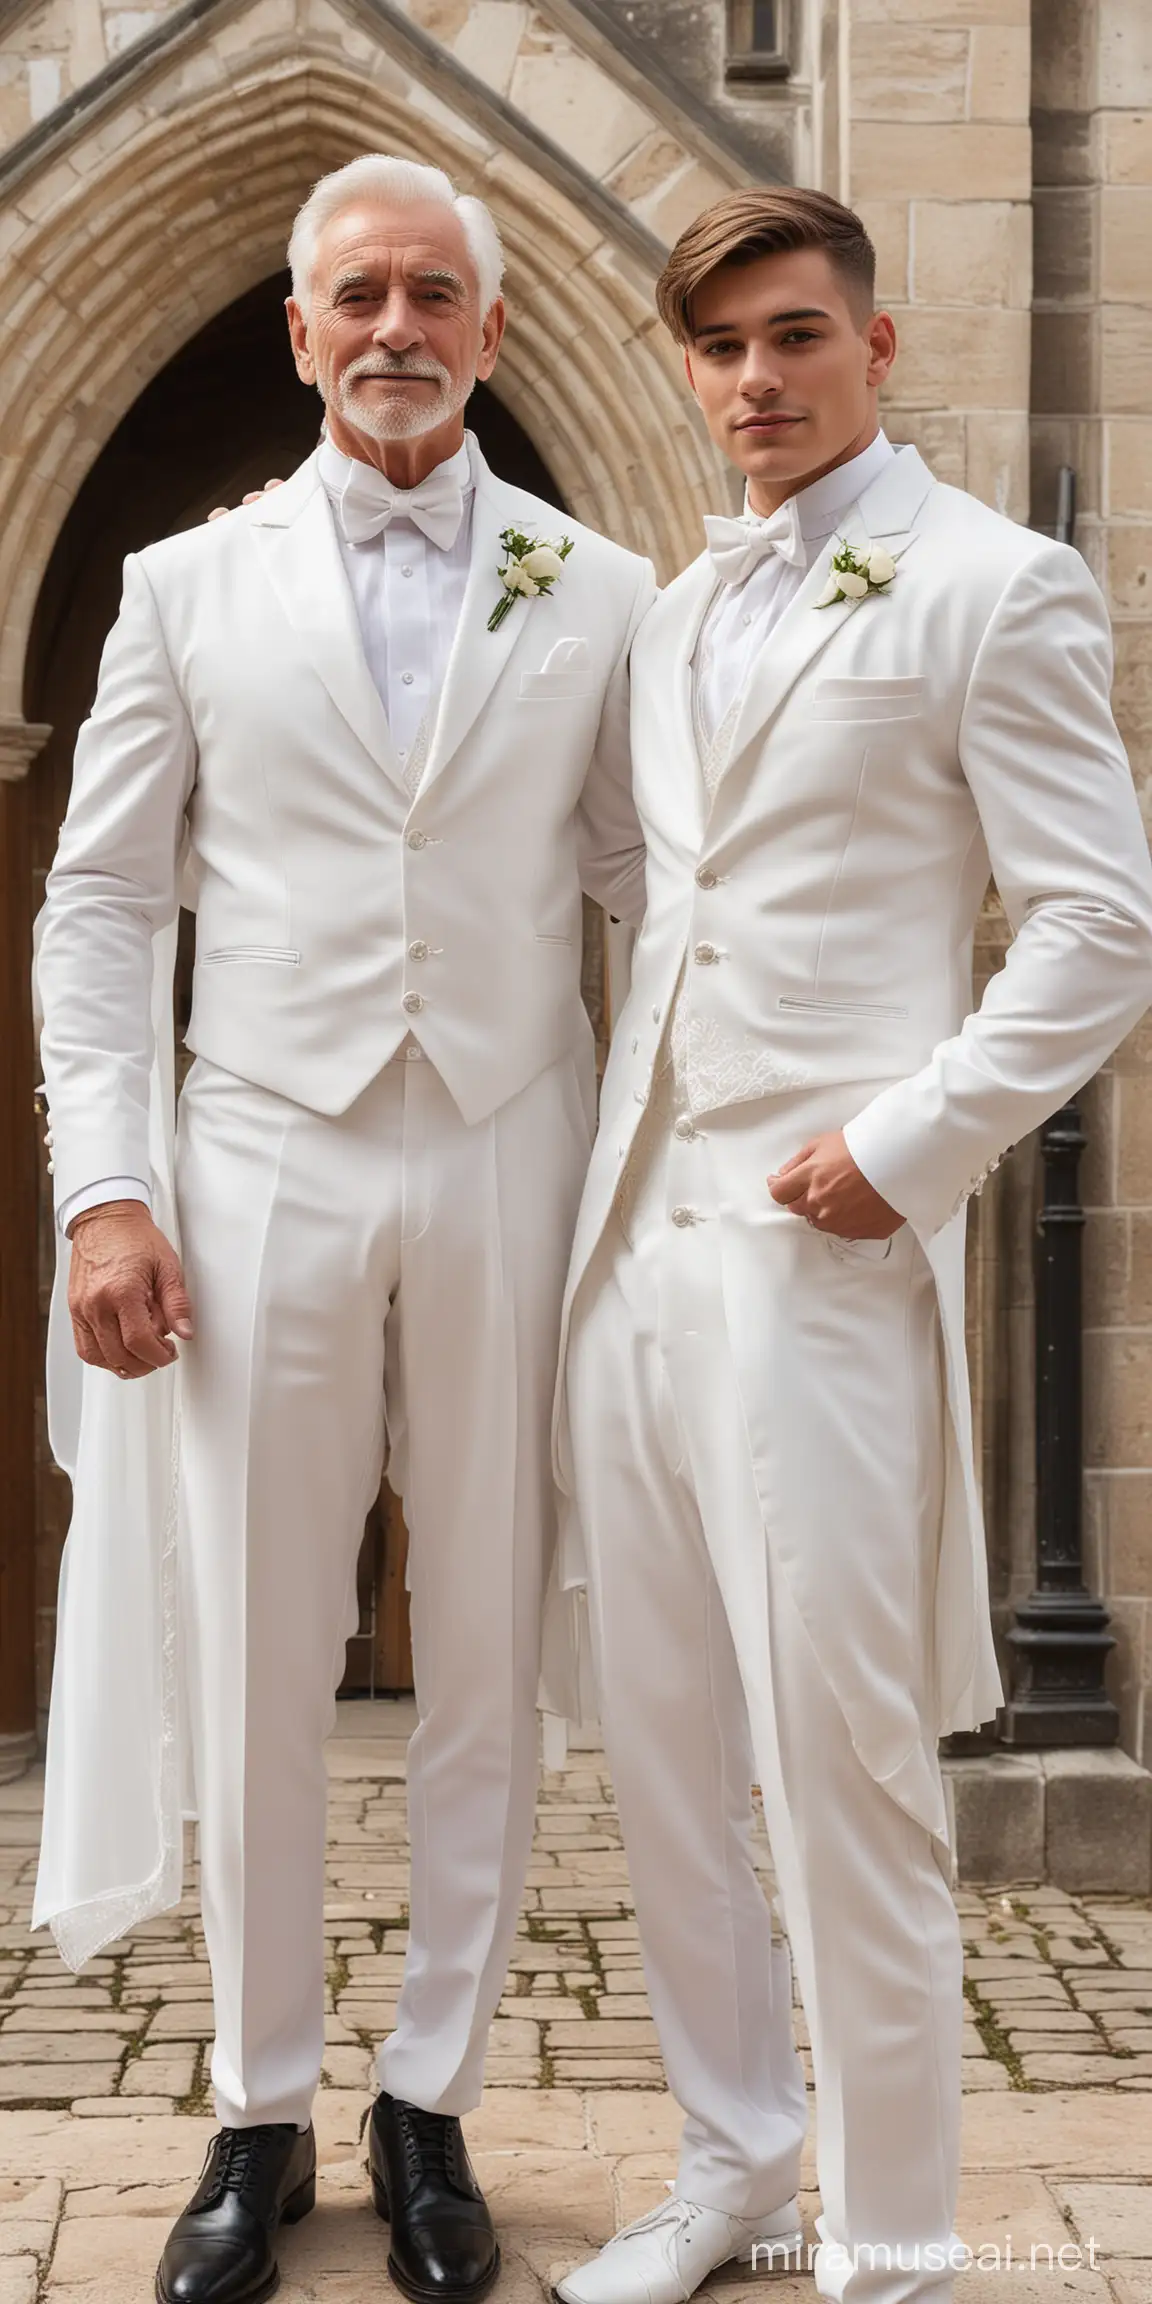 Young and old gay wedding, hot,handsome, beautiful, sexy, big fat, beefy muscular grandfather as groom wearing white tuxedo with young beautiful crossdresser Twink boyfriend as bride in white wedding dress. Background of old beautiful chapel 